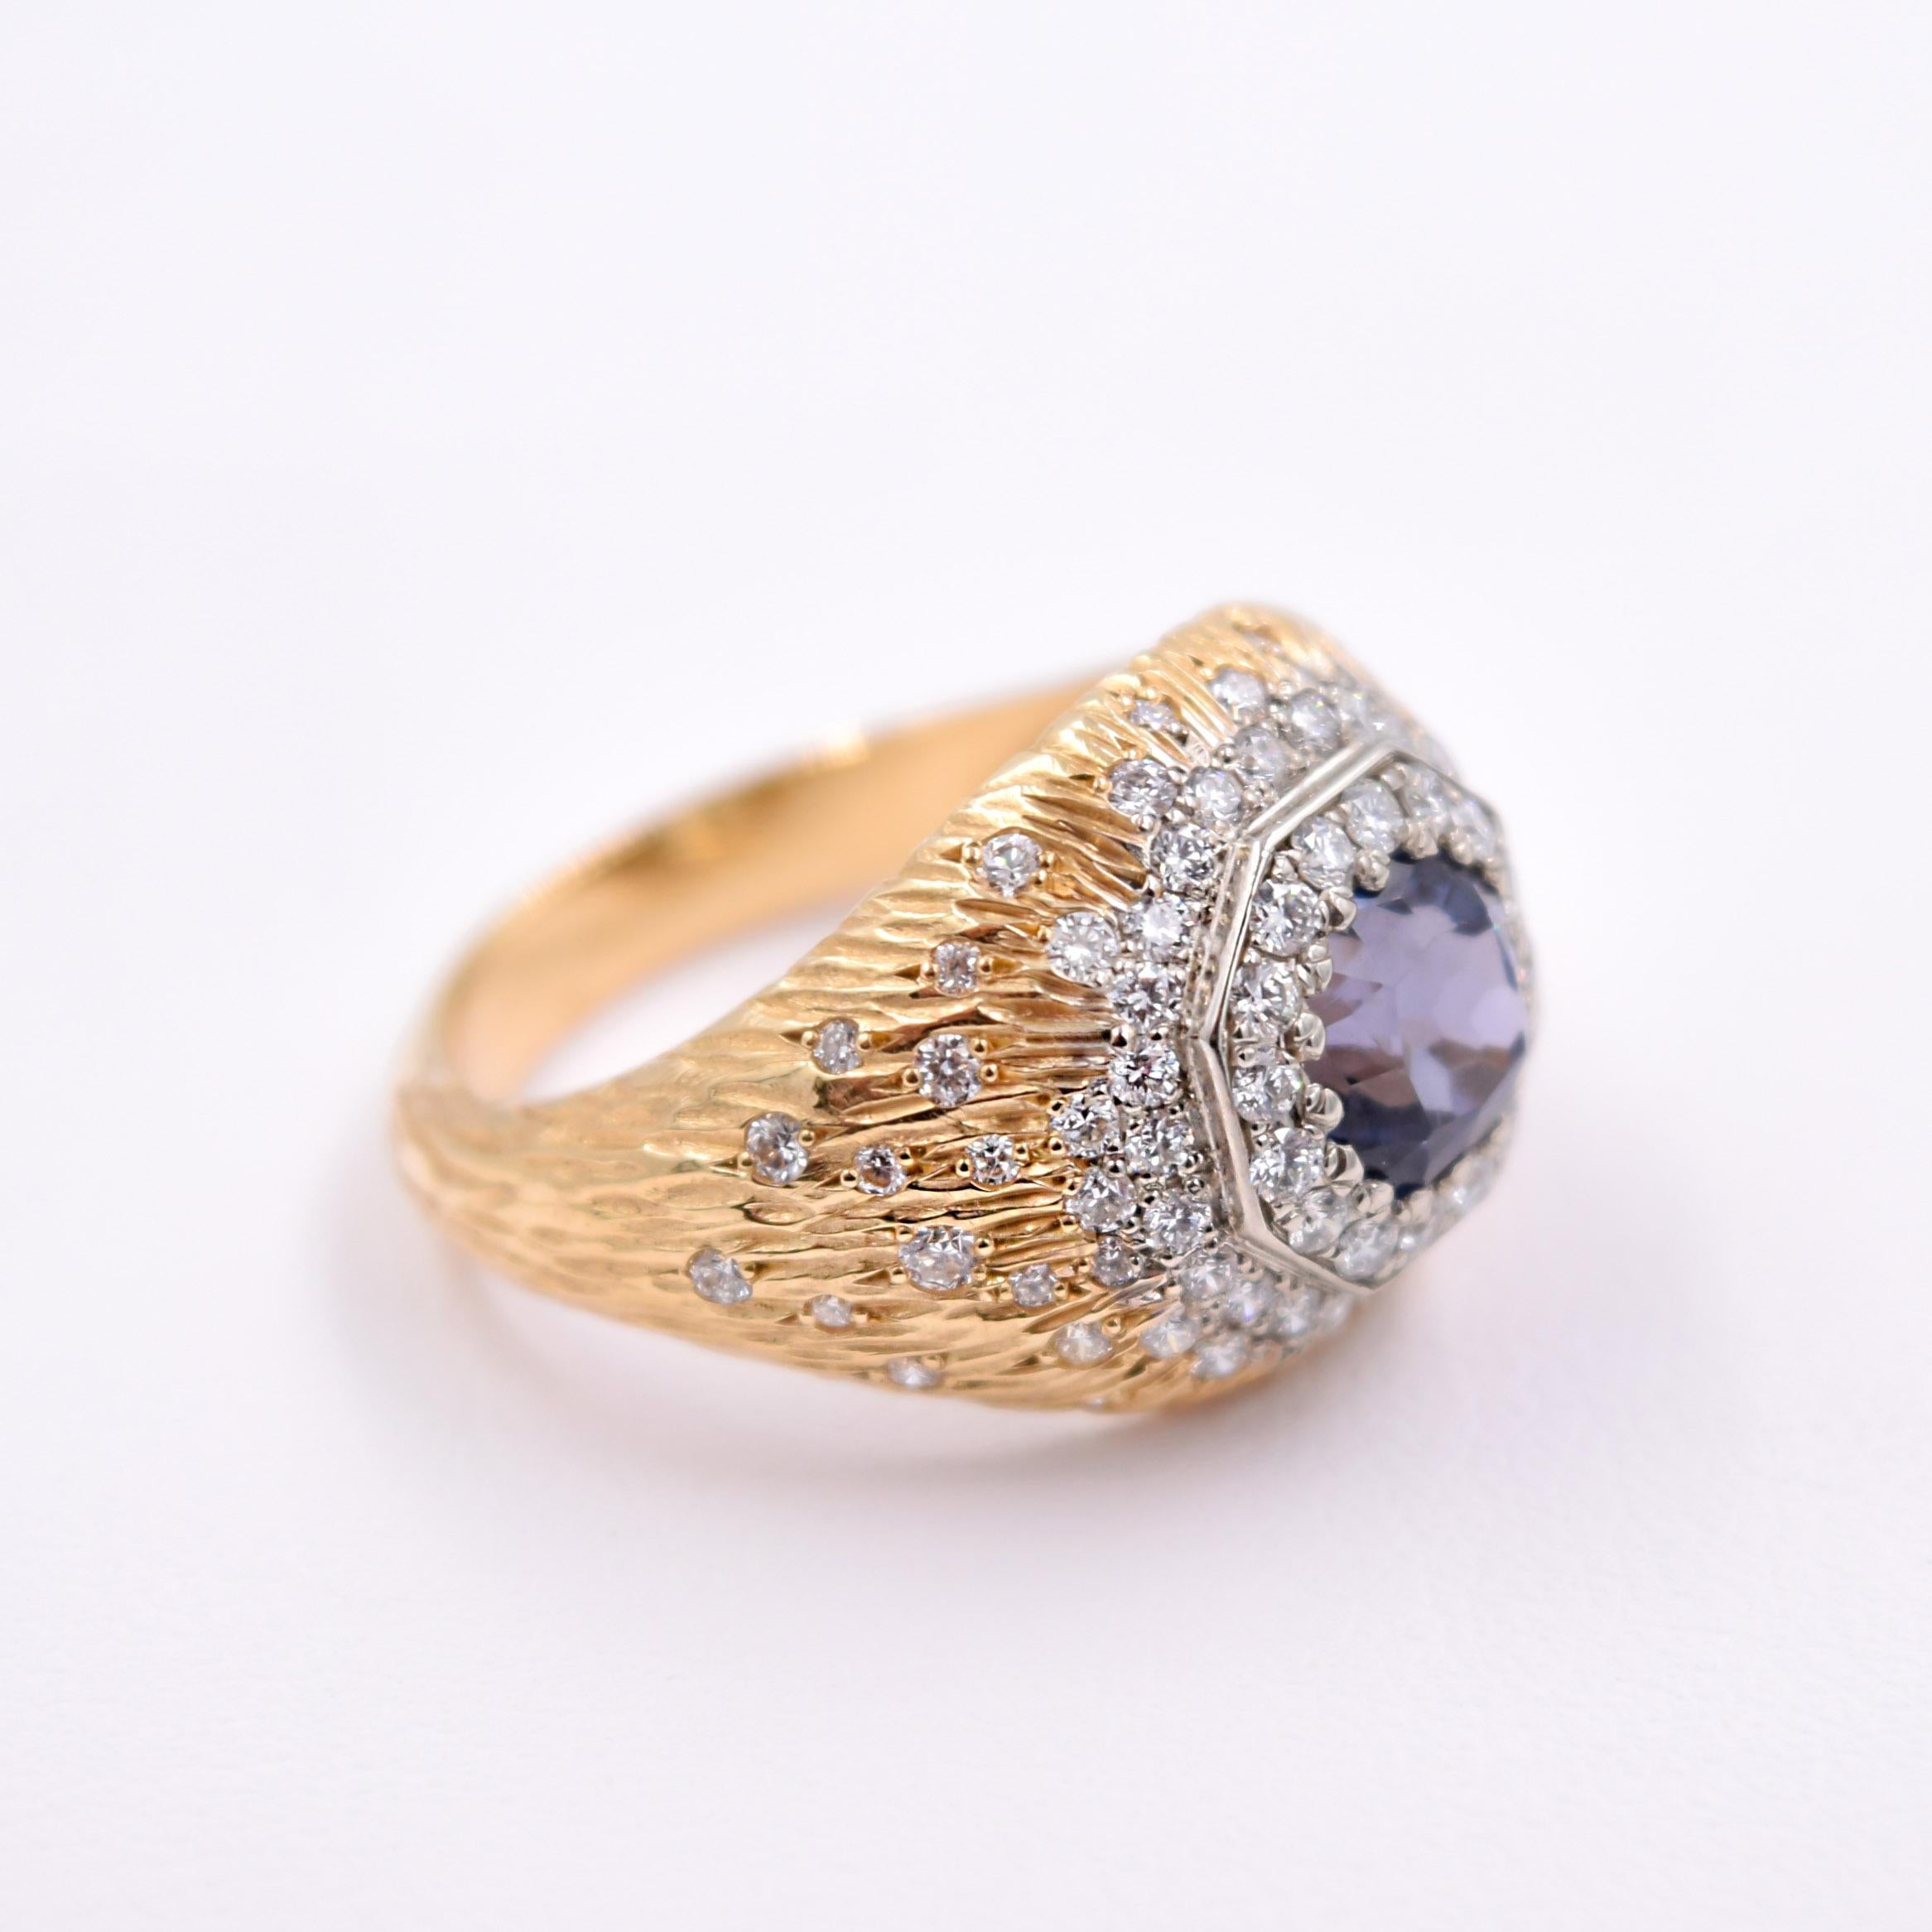 Carl Priolo 1.75 Carat Blue Spinel and White Diamond Cocktail Ring 18 Karat Gold For Sale 1